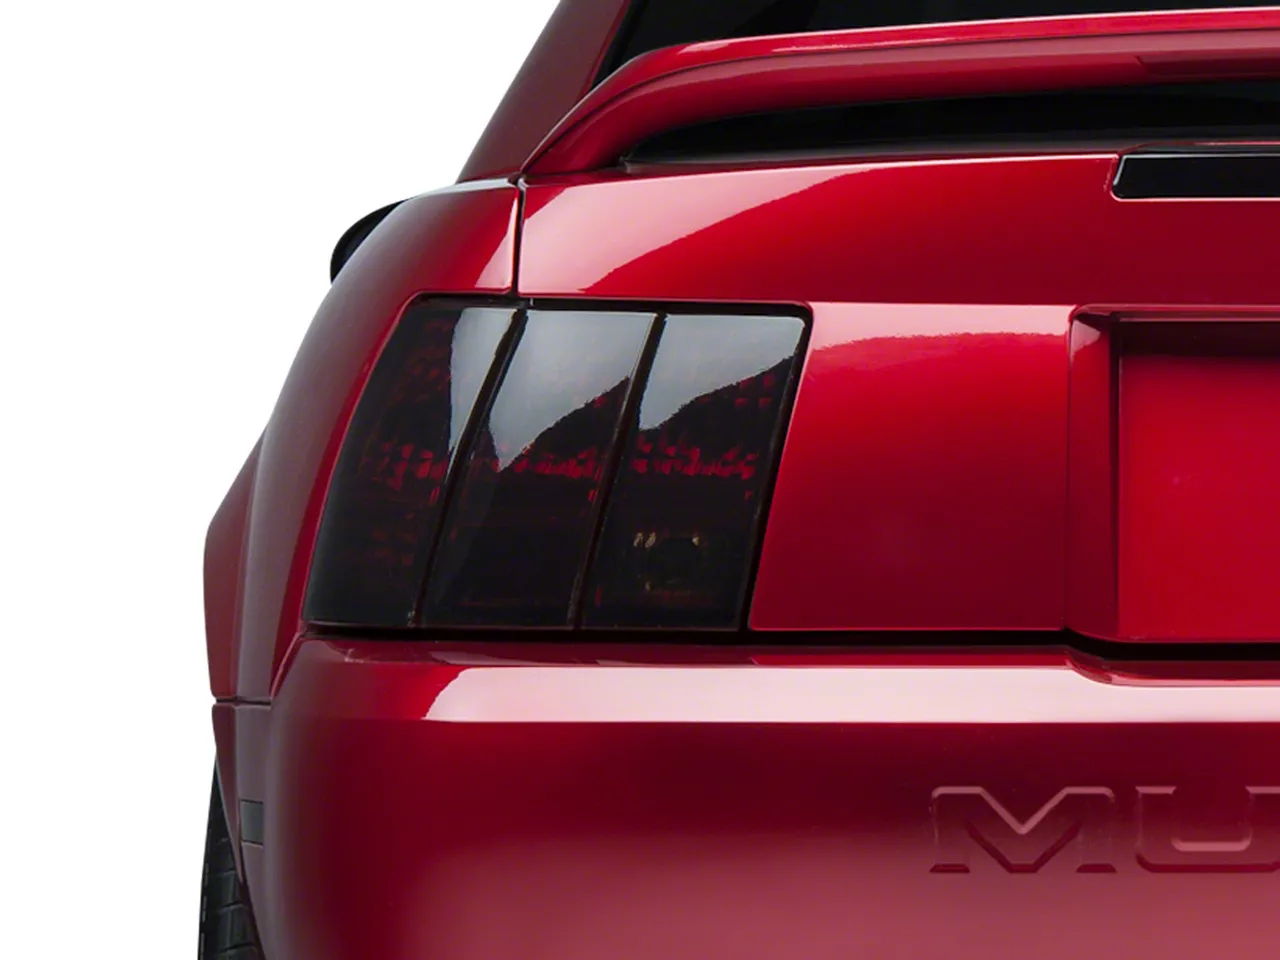 Citere Ren Ægte SEC10 Mustang Tail Light Tint; Smoked 26060 (99-04 Mustang) - Free Shipping